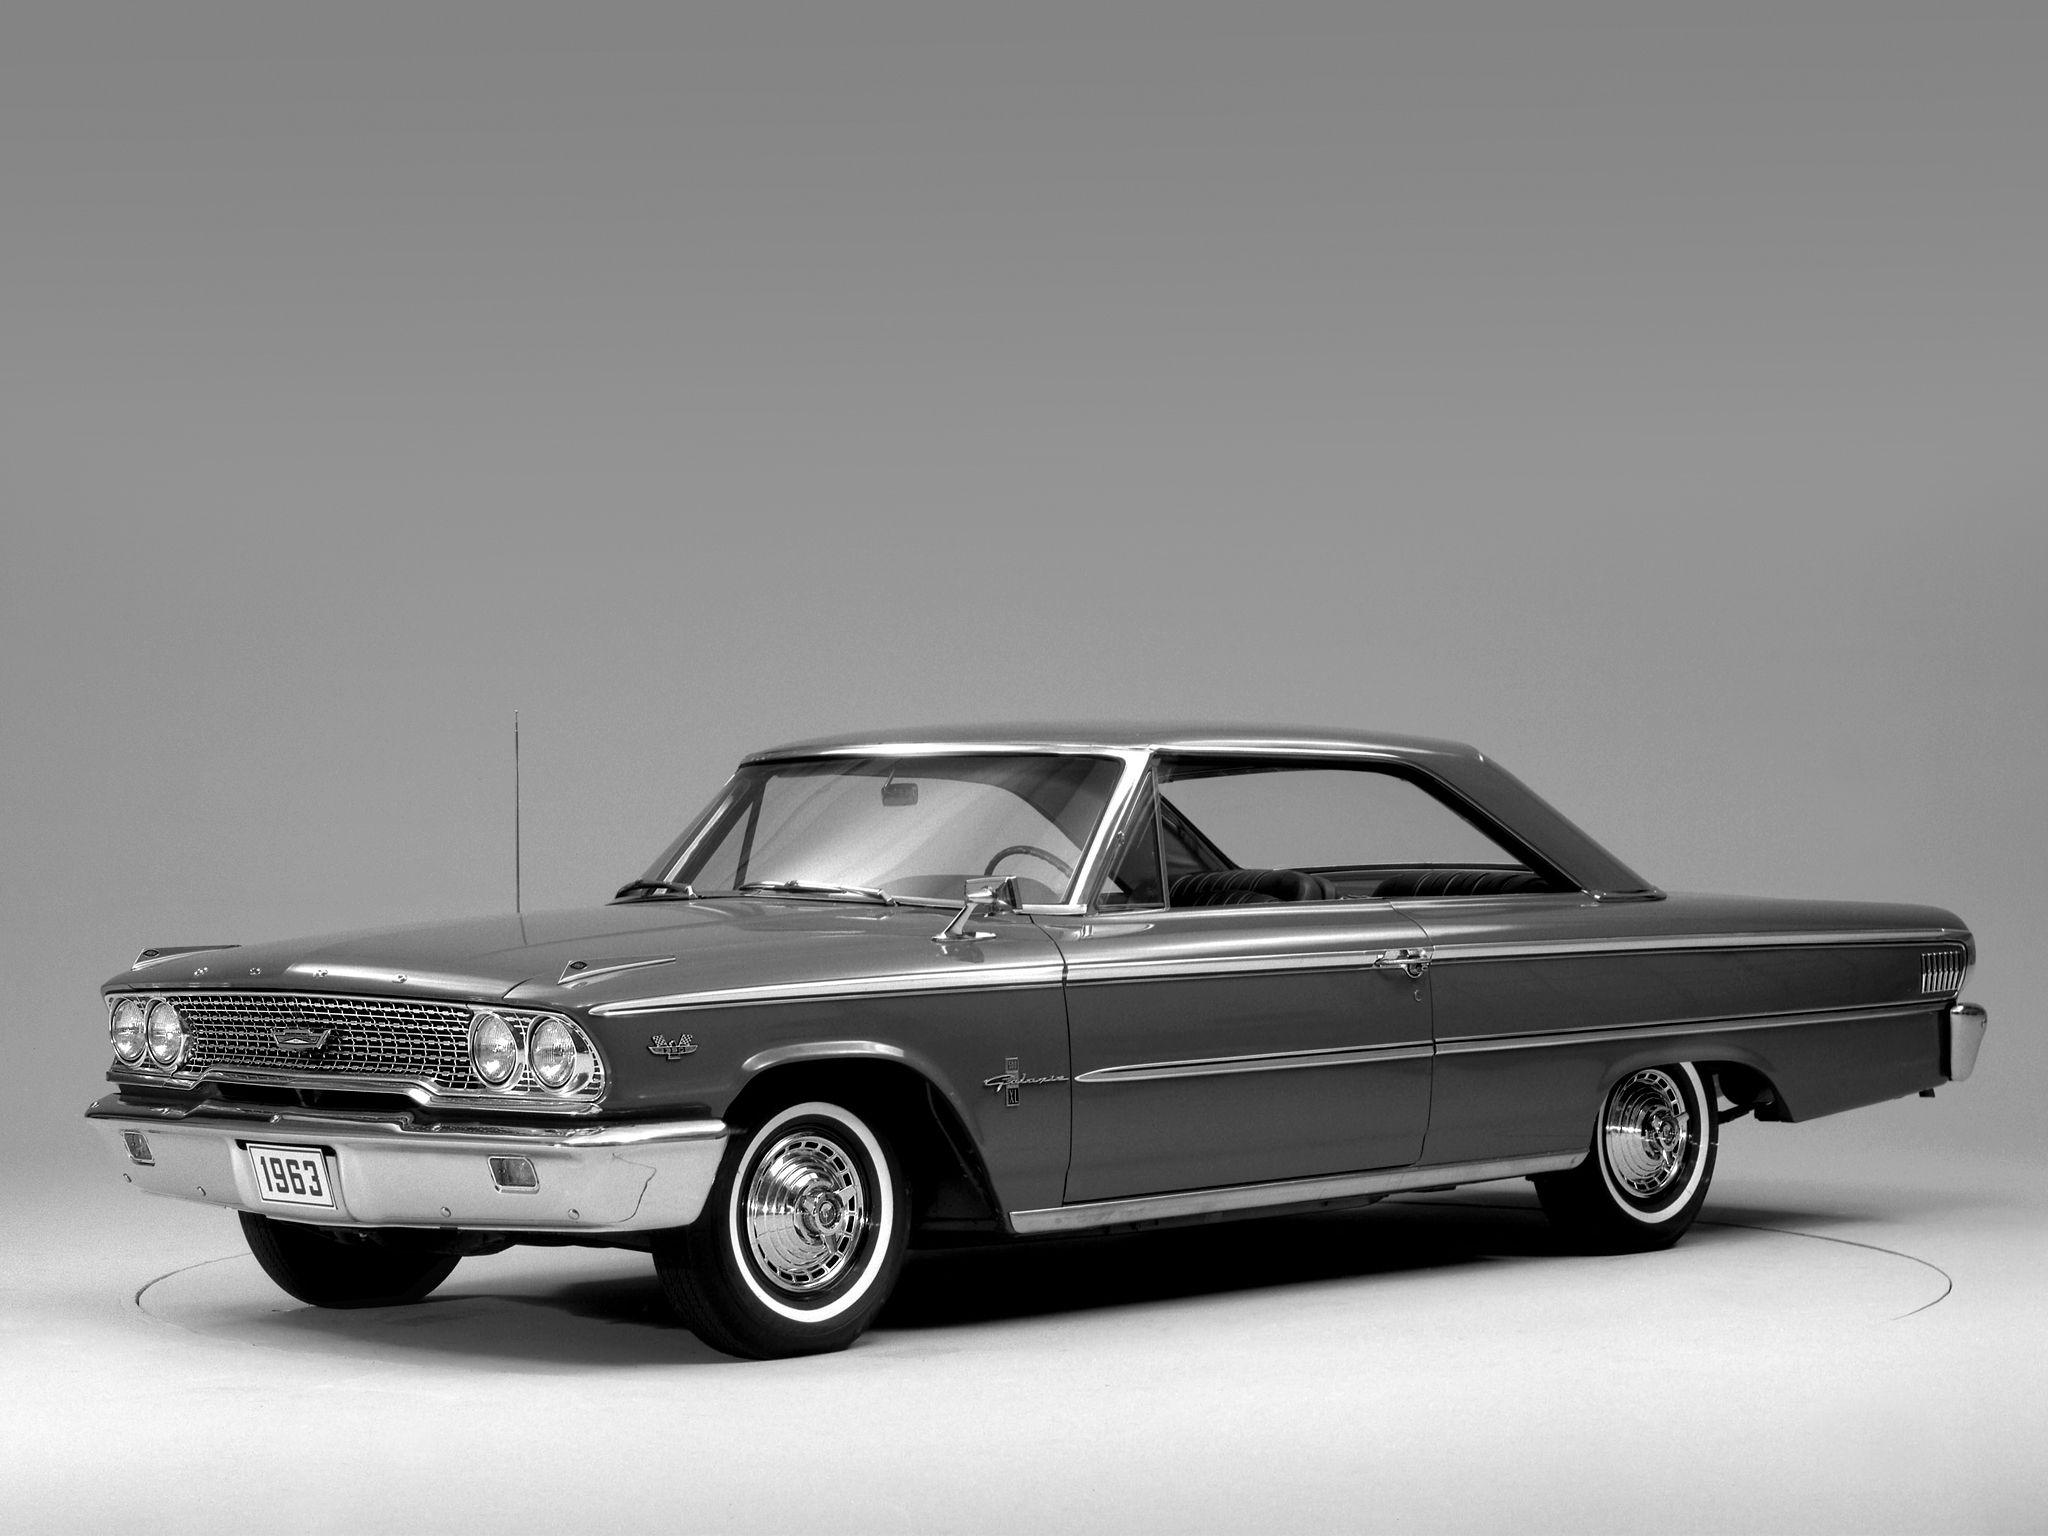 Ford Galaxie 500 X L Hardtop Coupe Classic Wallpaper